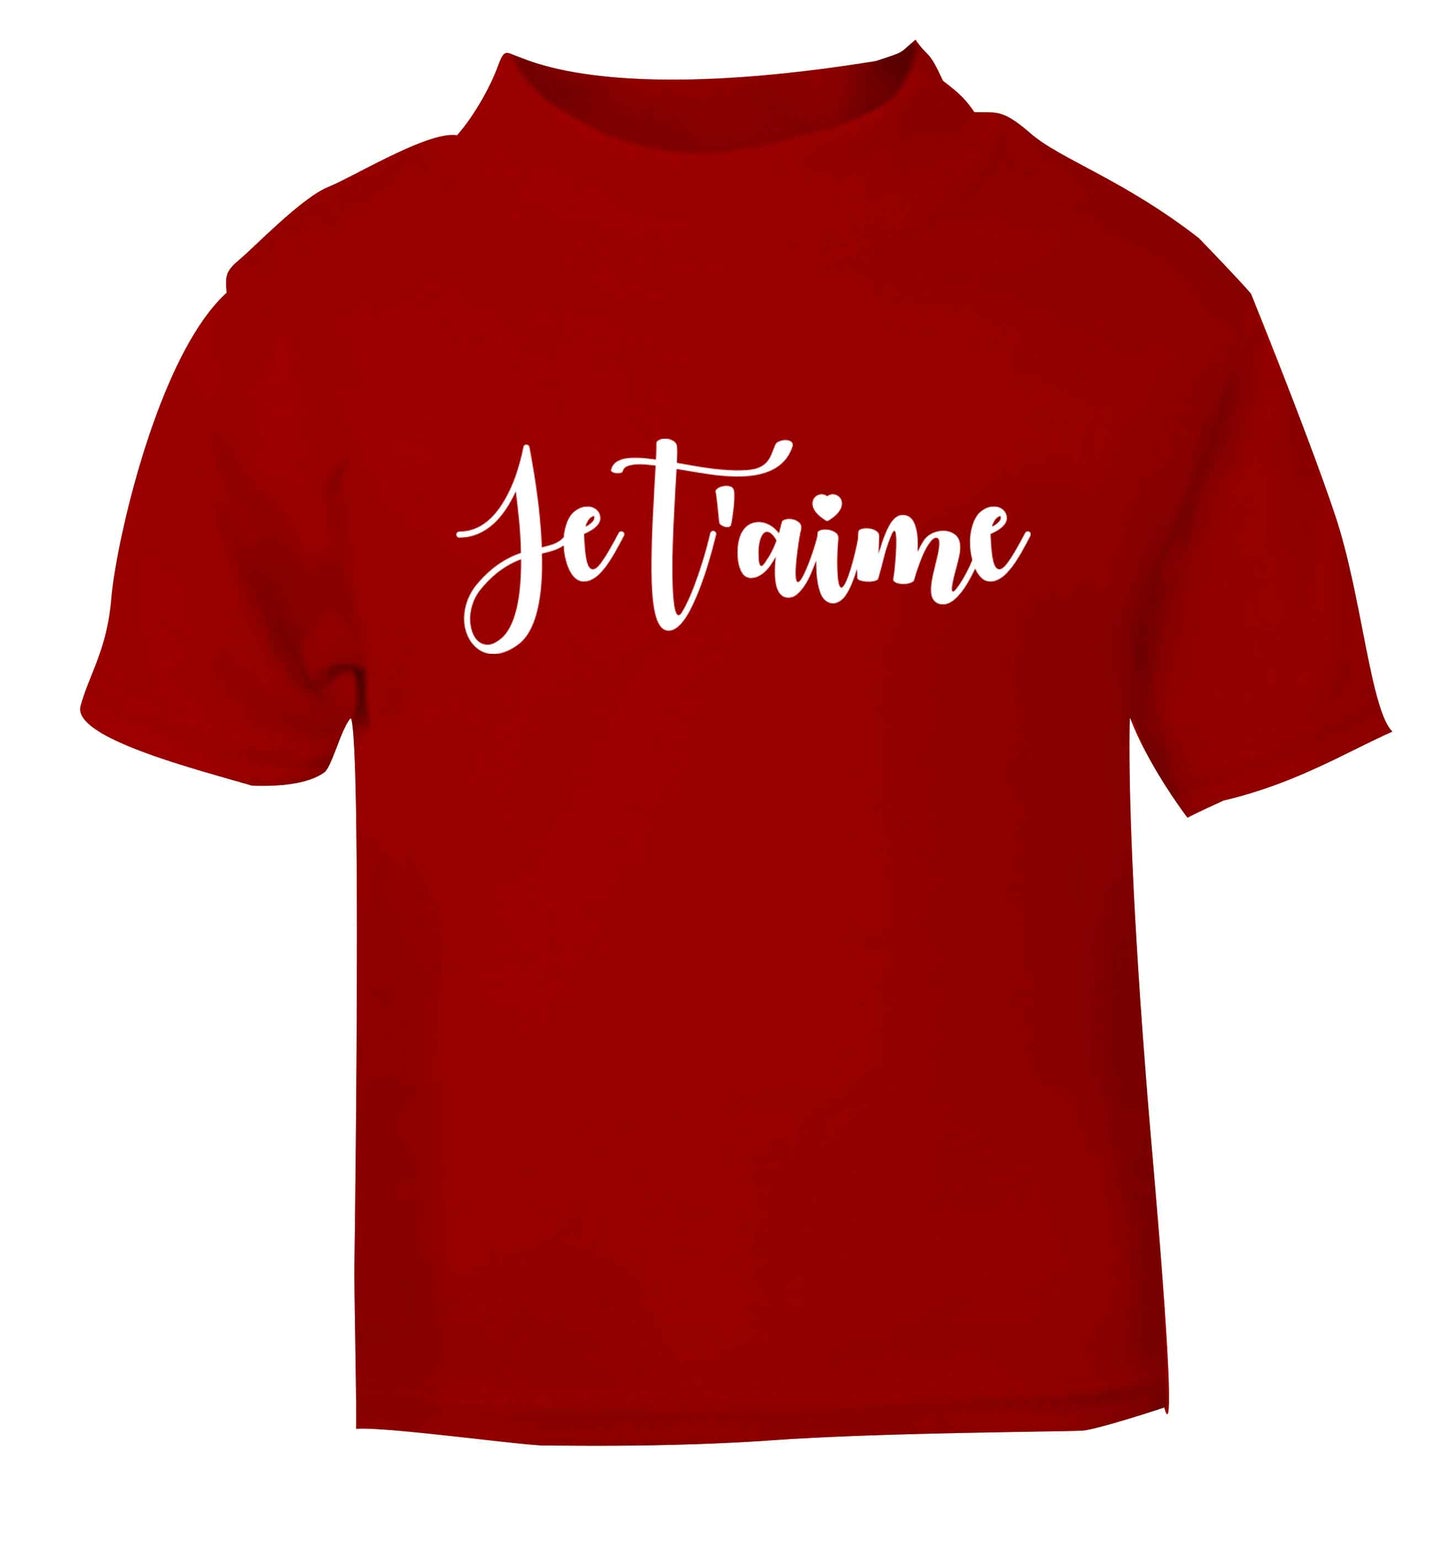 Je t'aime red baby toddler Tshirt 2 Years